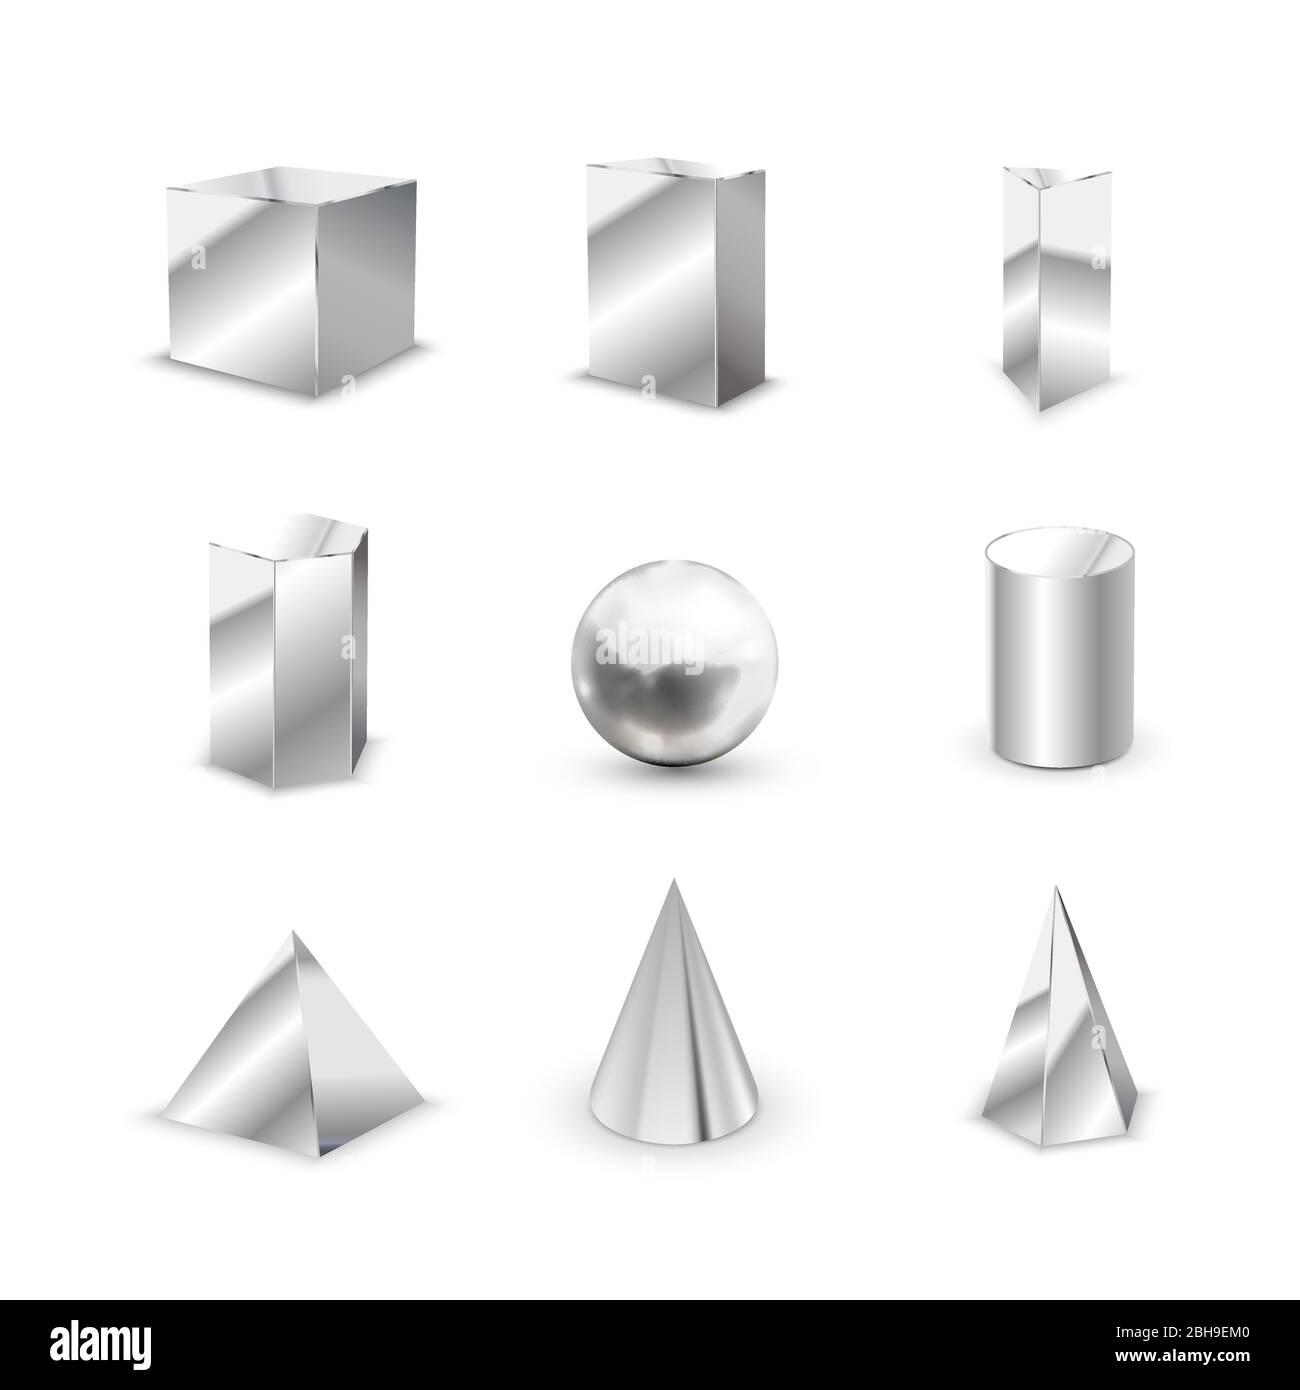 4,355 thin Metal Sheet Images, Stock Photos, 3D objects, & Vectors